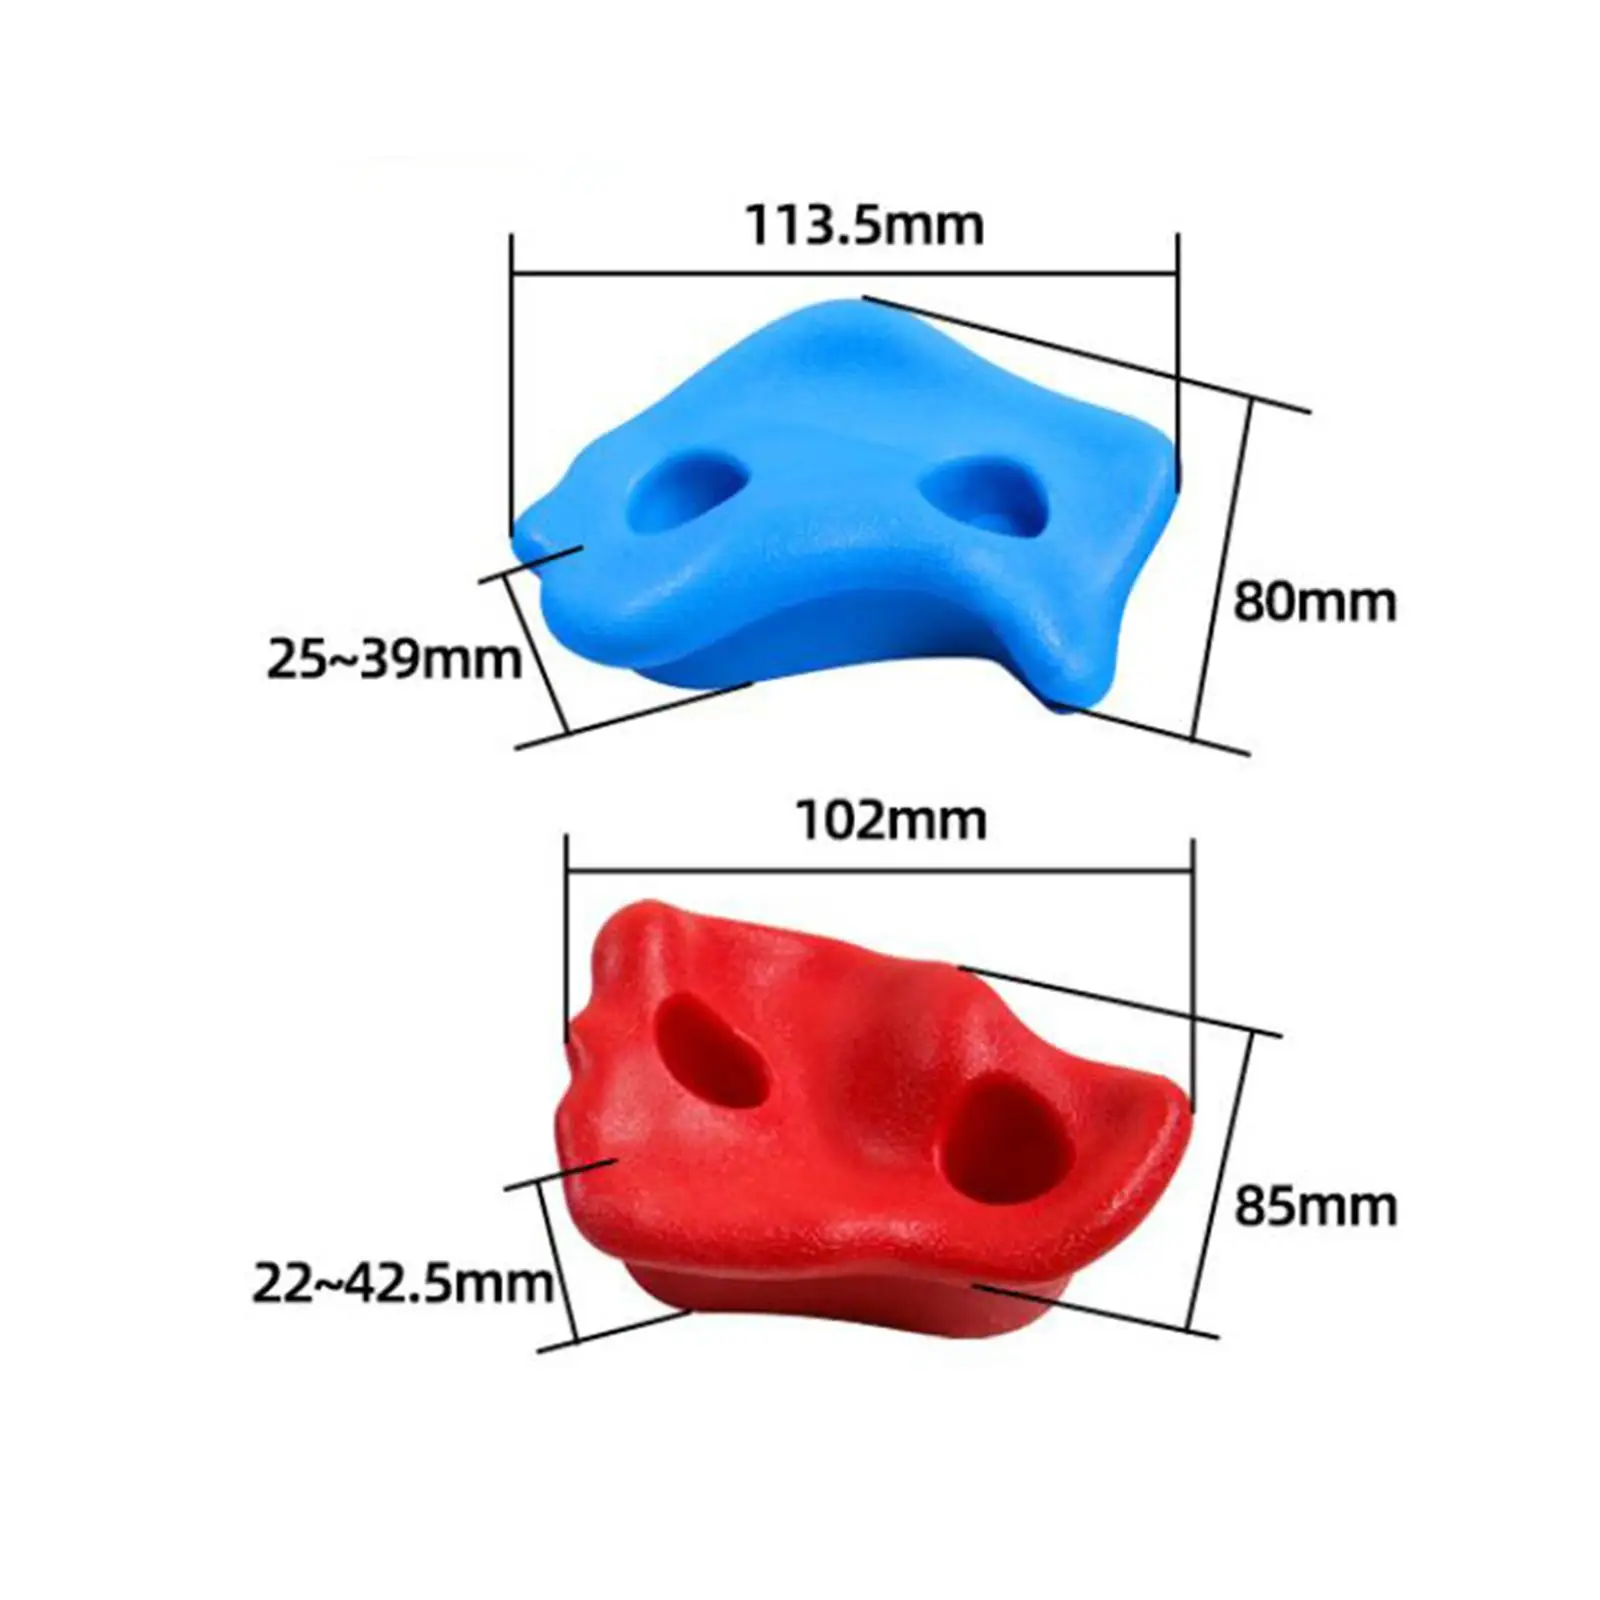 12x Colored Climbing Holds for Outdoor Climbing, Hardware Included